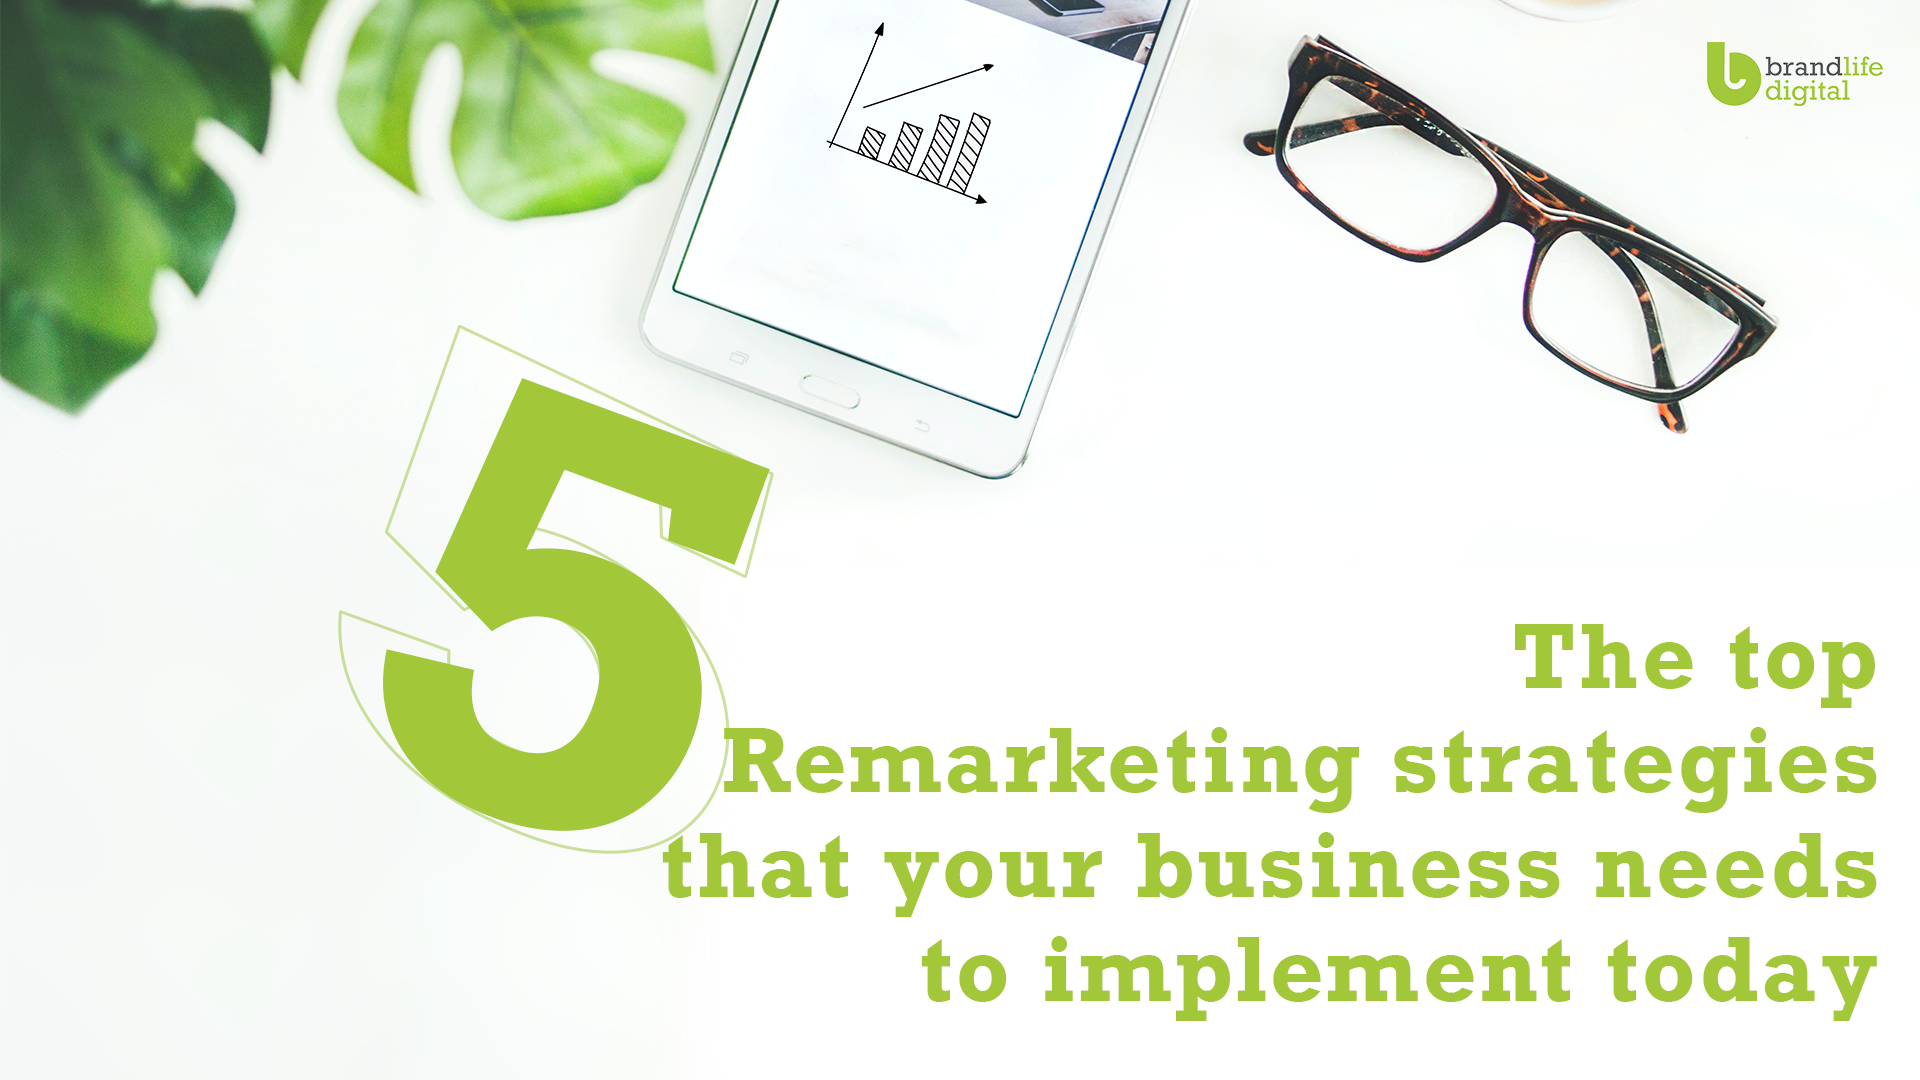 THE TOP 5 REMARKETING STRATEGIES THAT YOUR BUSINESS NEEDS TO IMPLEMENT TODAY